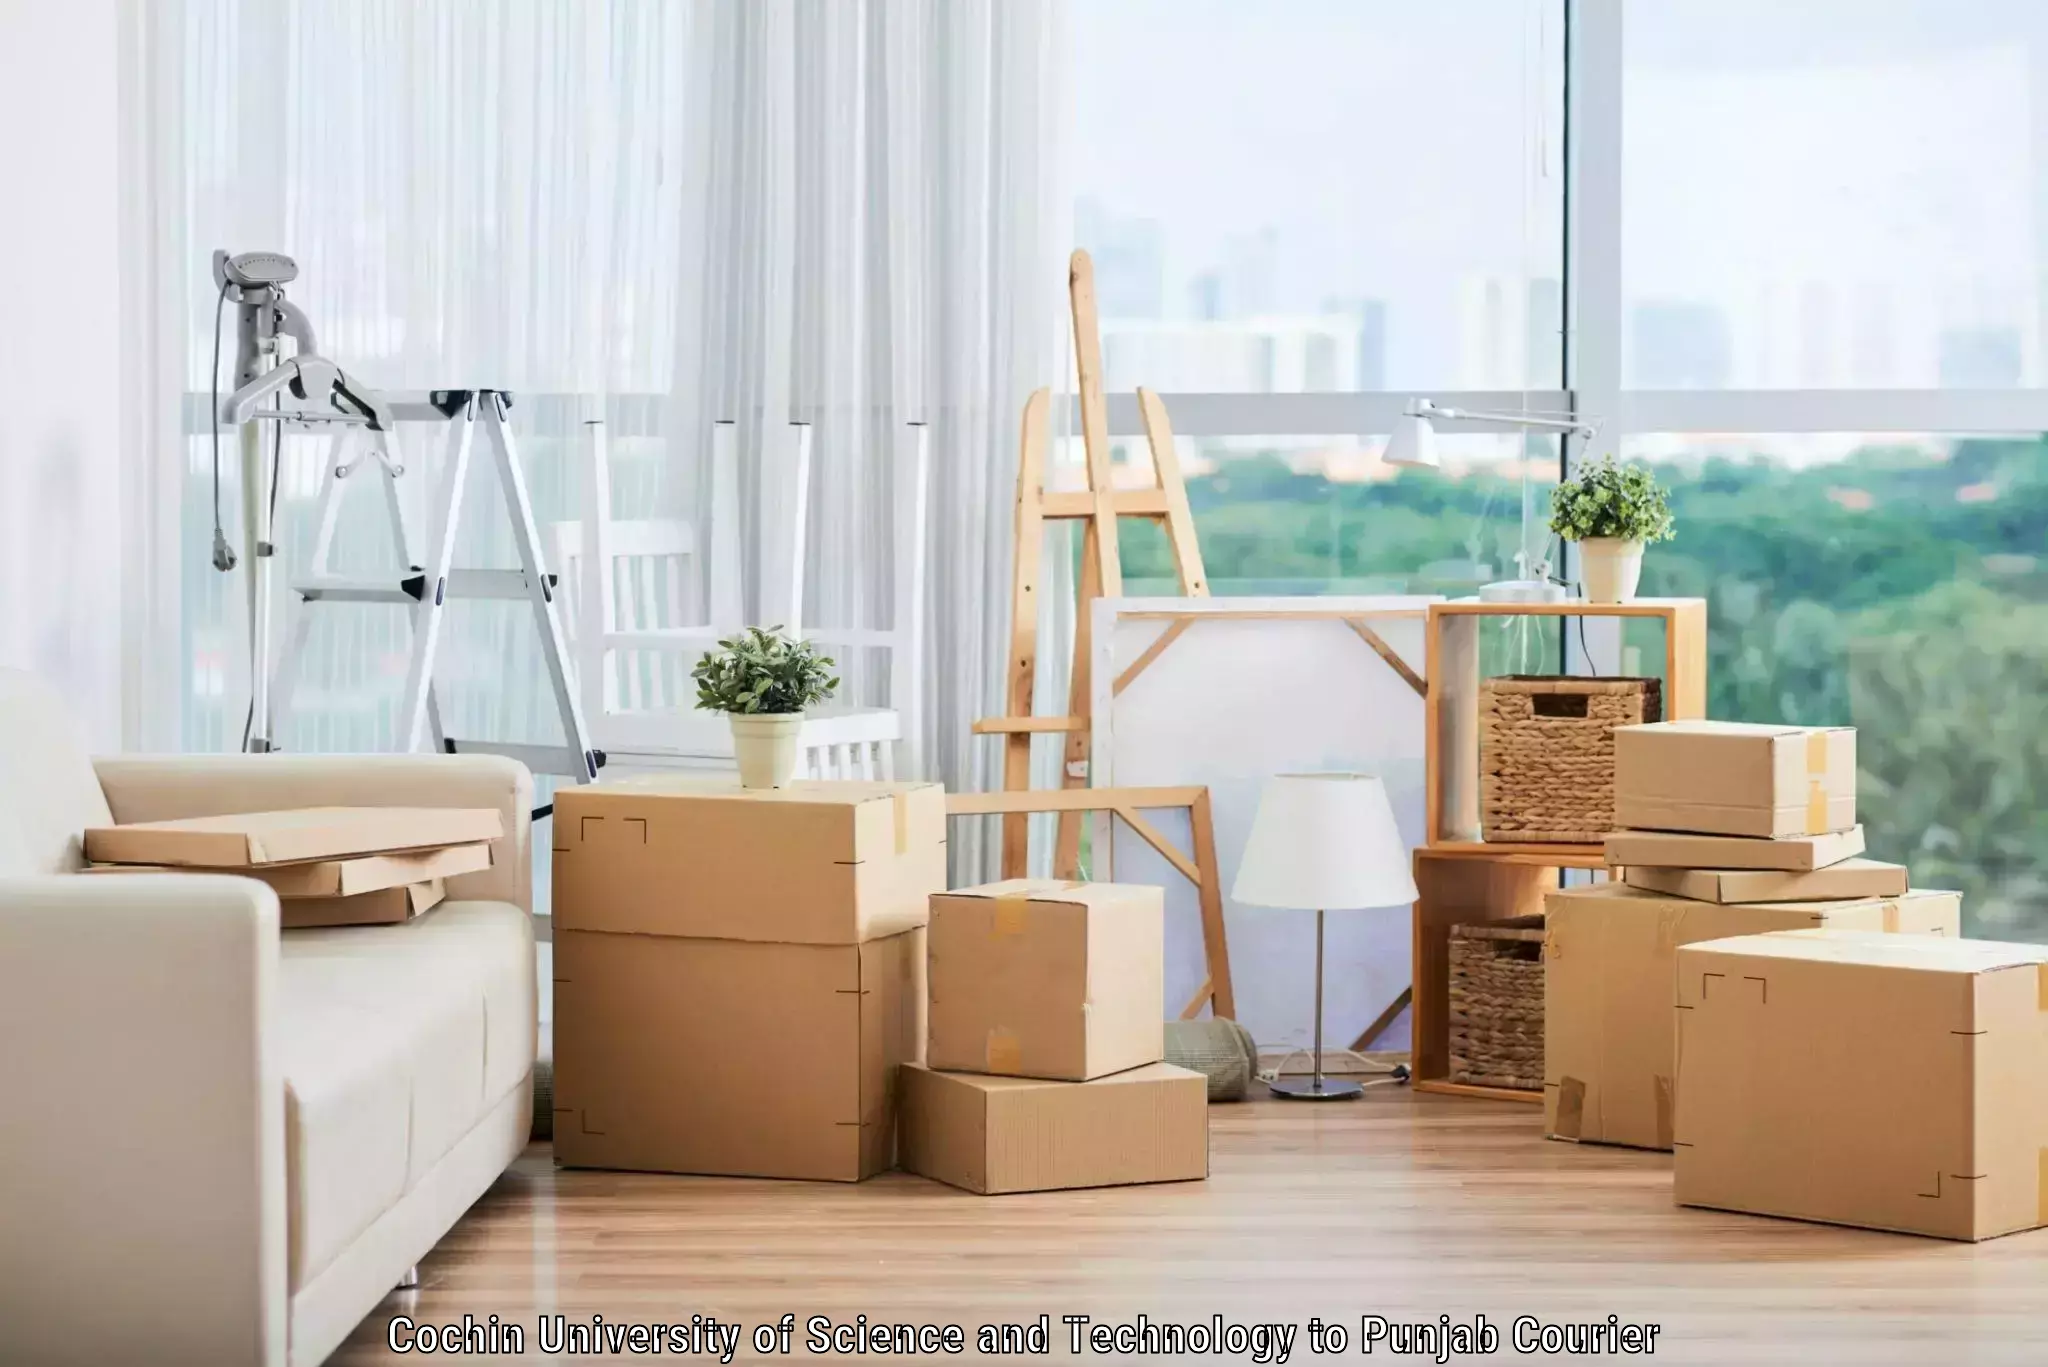 Professional furniture transport Cochin University of Science and Technology to Zirakpur